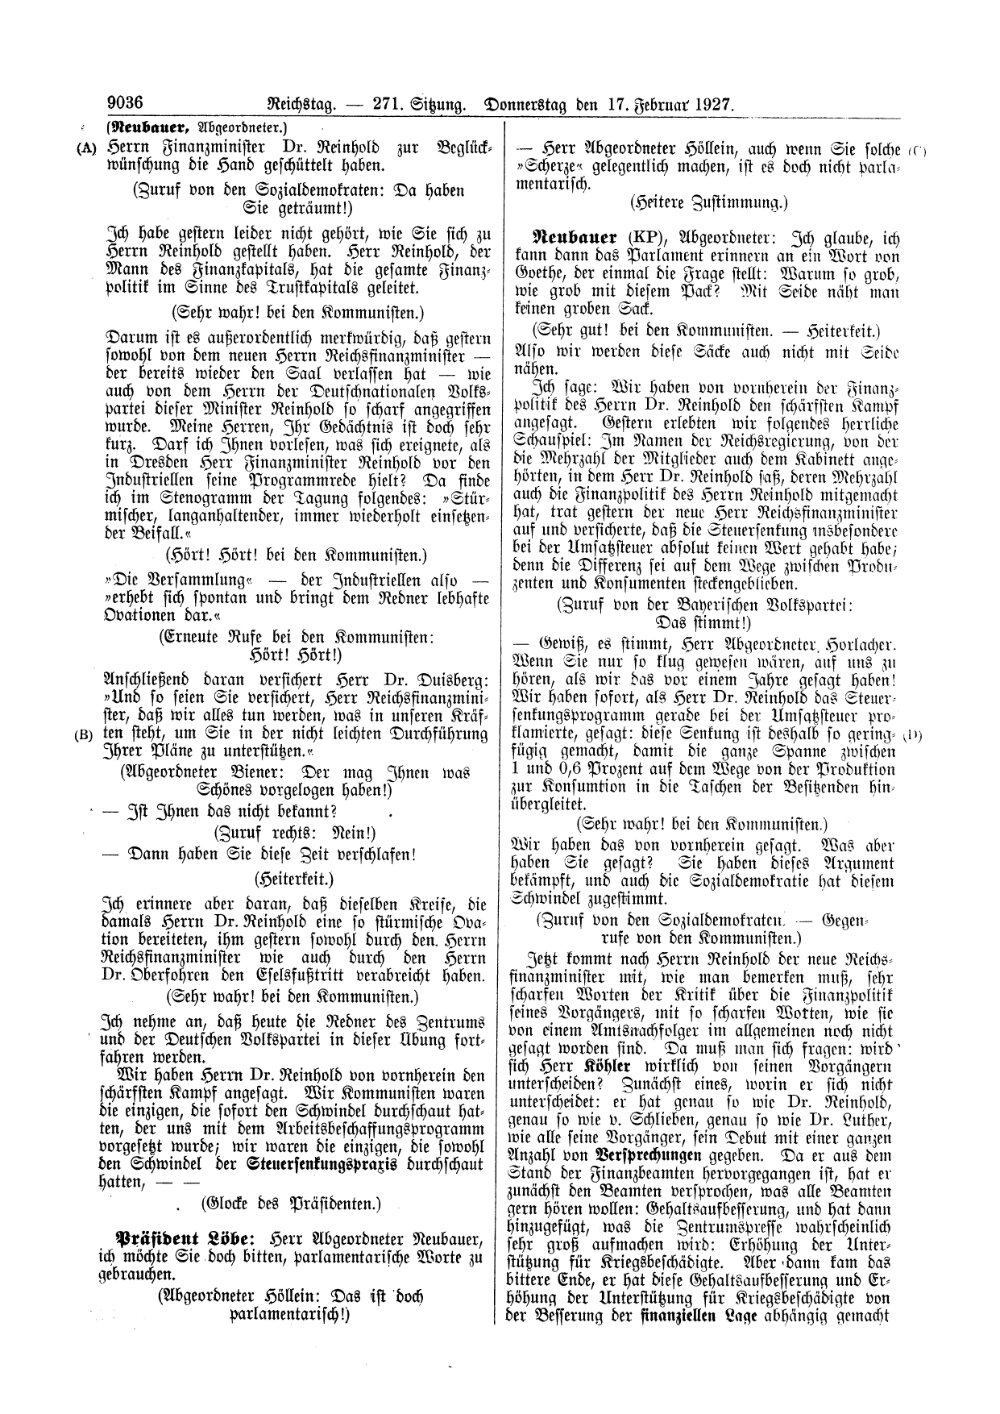 Scan of page 9036